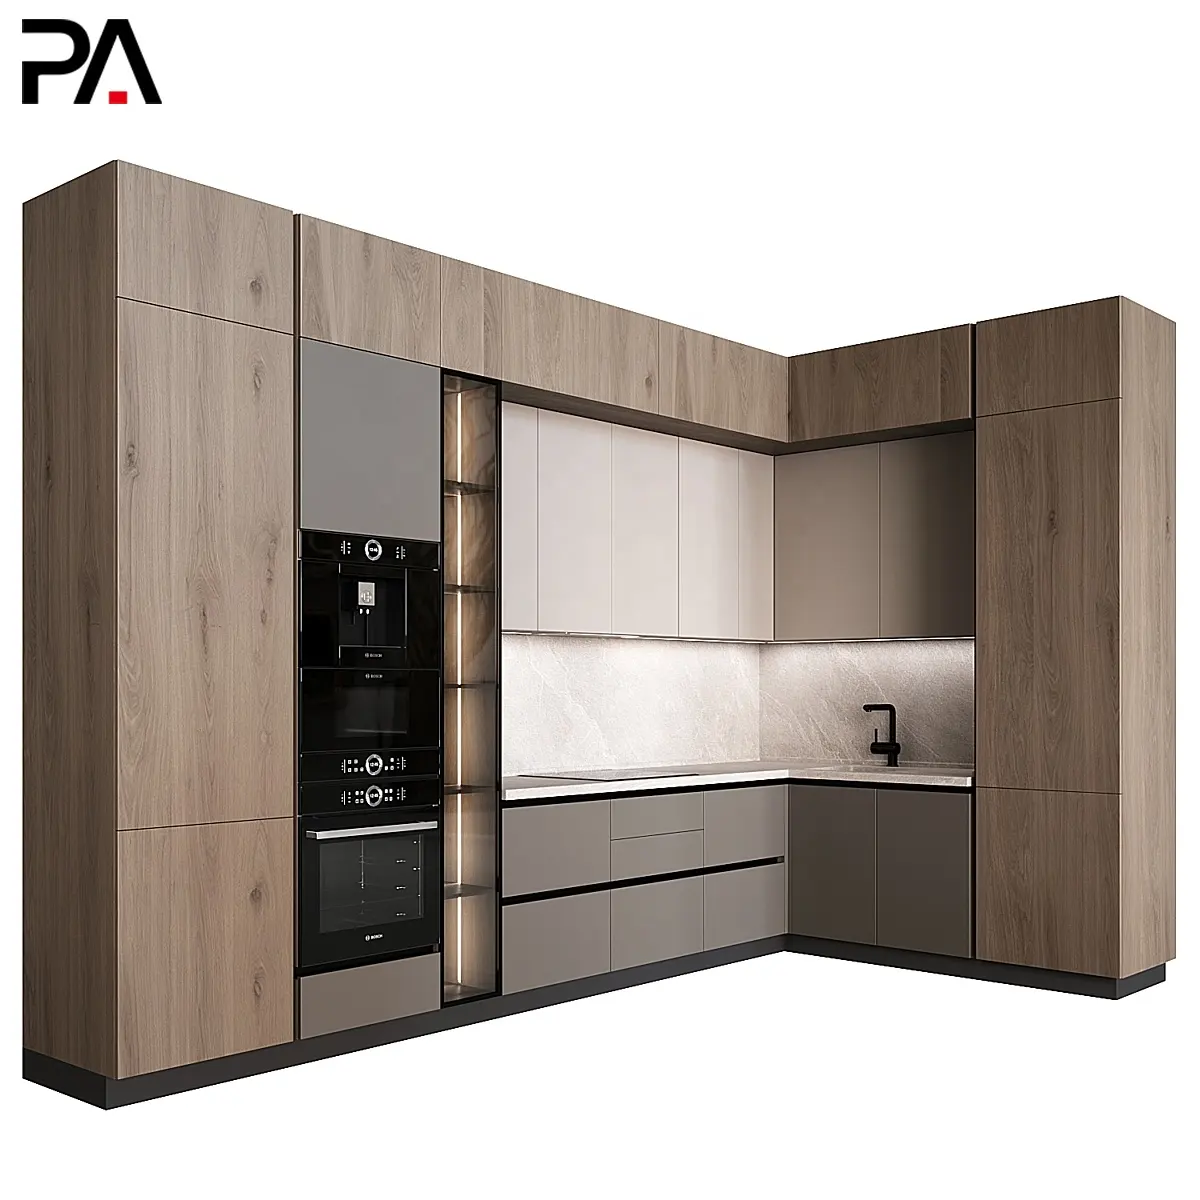 PA low price compact all in one movable 3 pieces kitchen cabinet pantry units